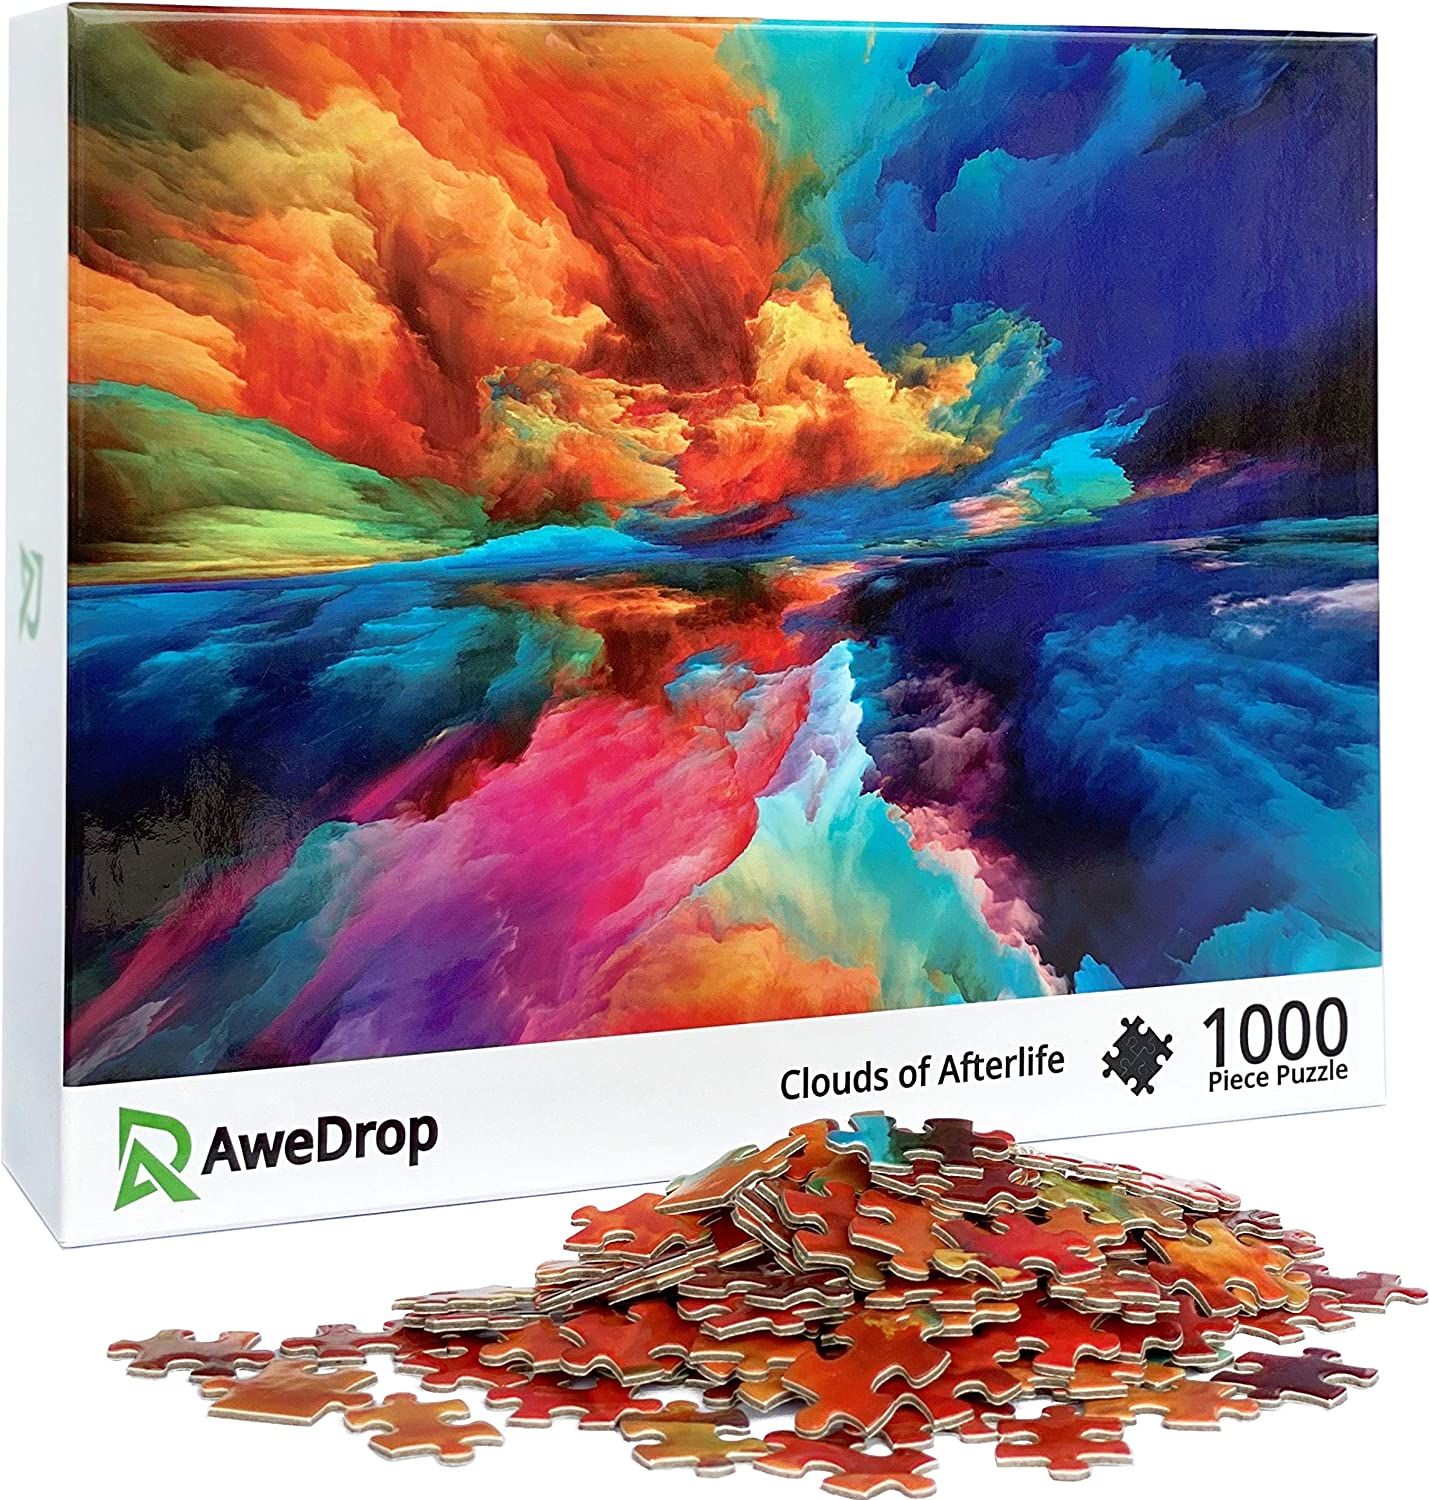 AweDrop Clouds of Afterlife 1000 Piece Jigsaw Puzzle 1